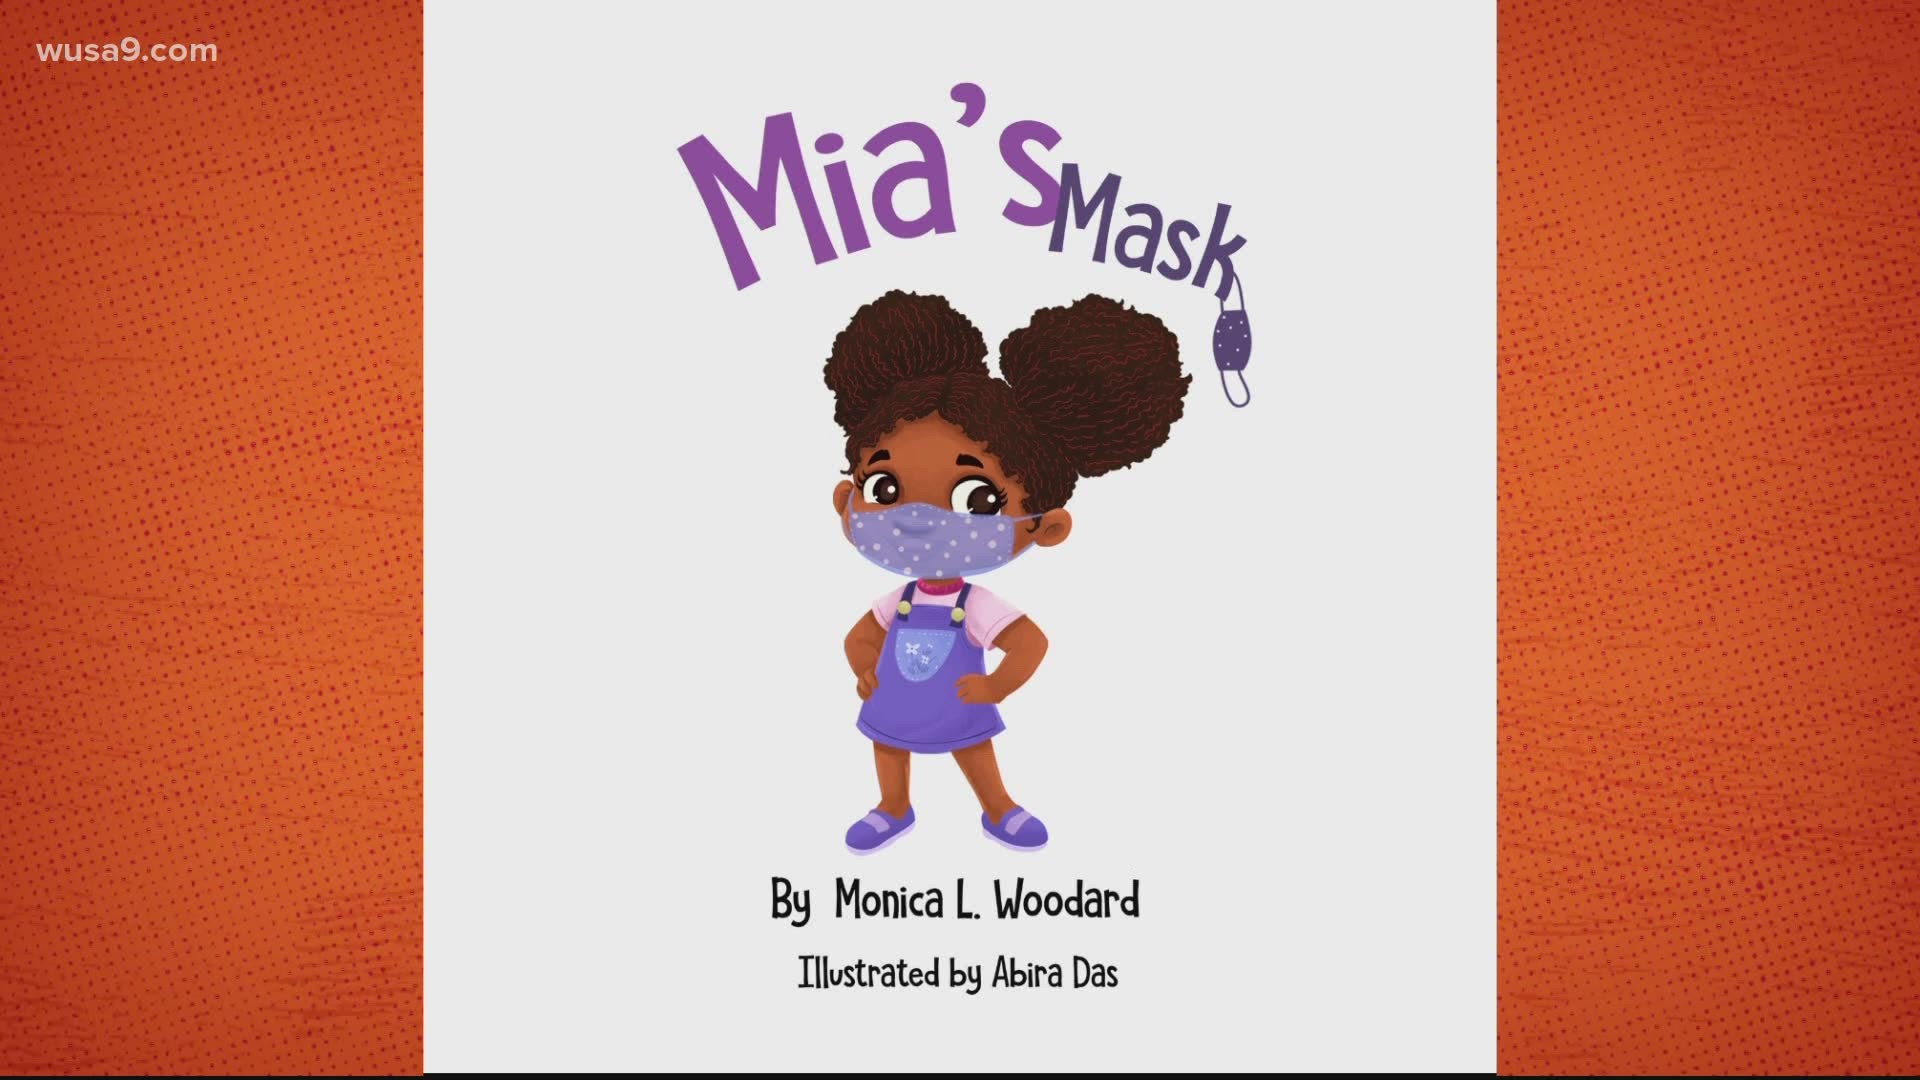 "Mia's Mask" aims to help kids understand the importance of wearing a face mask during the pandemic.